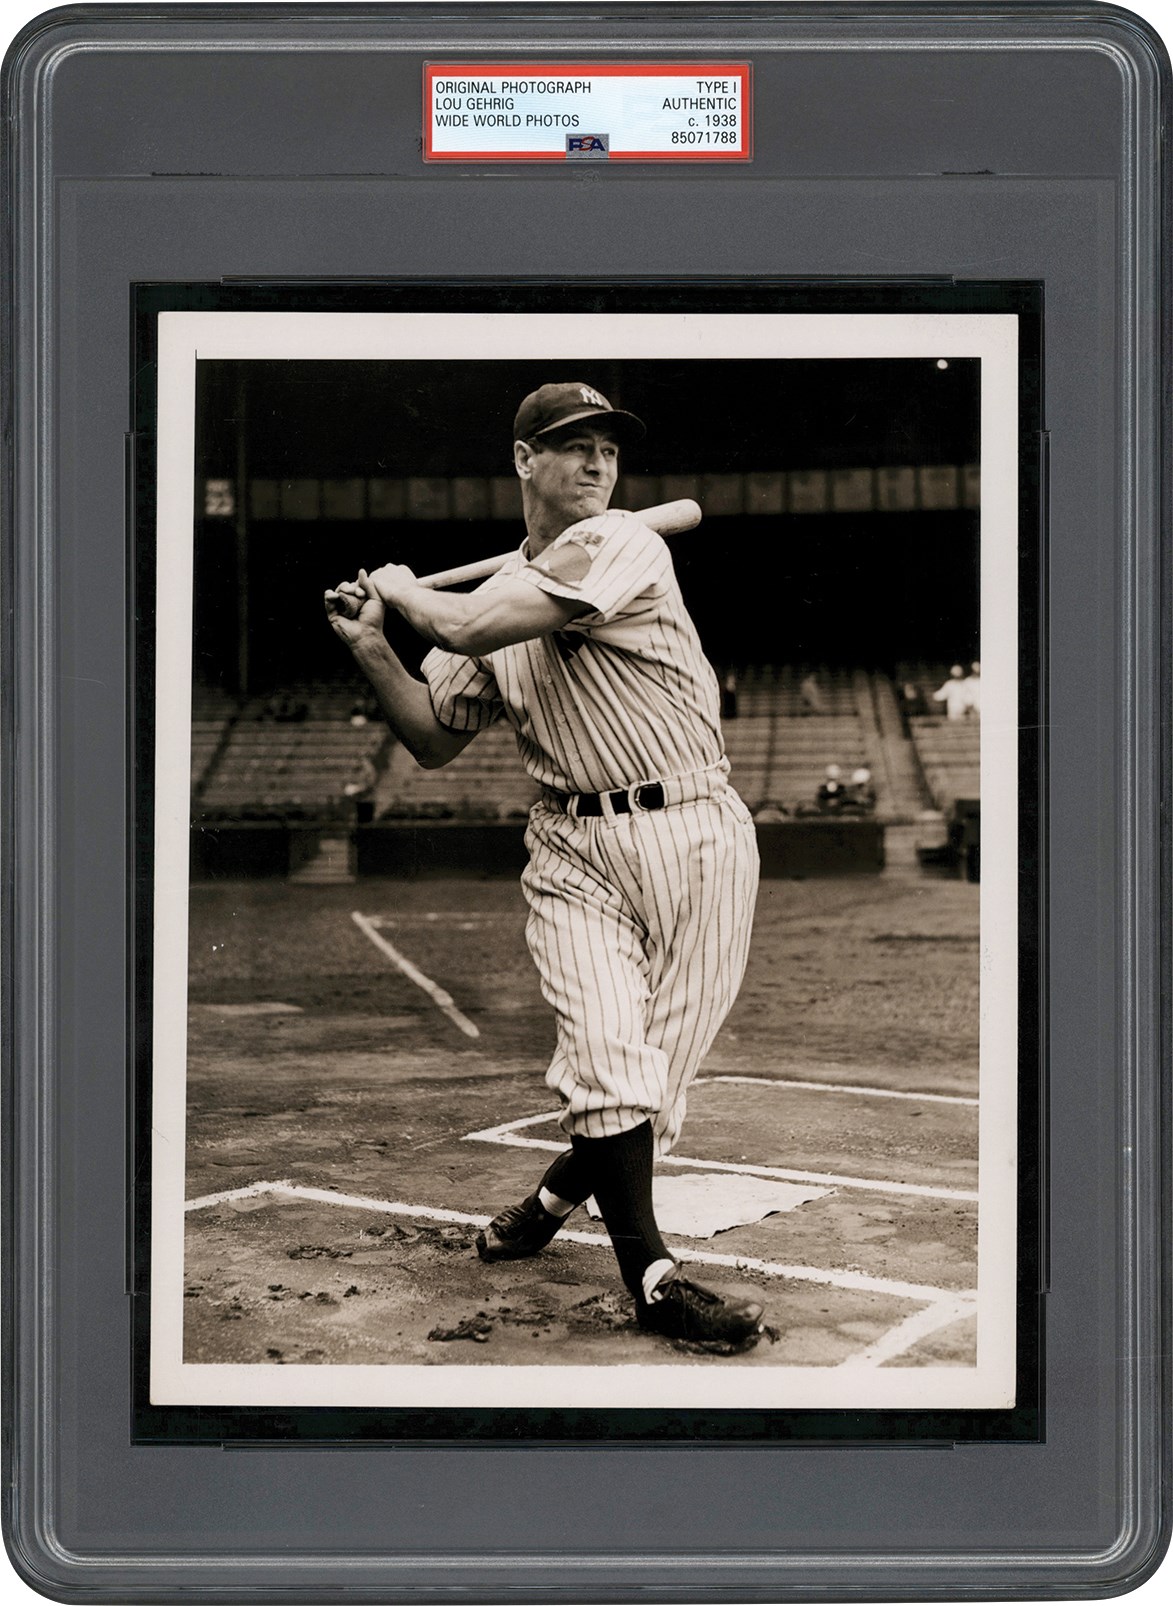 - 1938 Lou Gehrig Original Photograph Used for 1949 The Pride of the Yankees Comic Book Cover (PSA Type I)